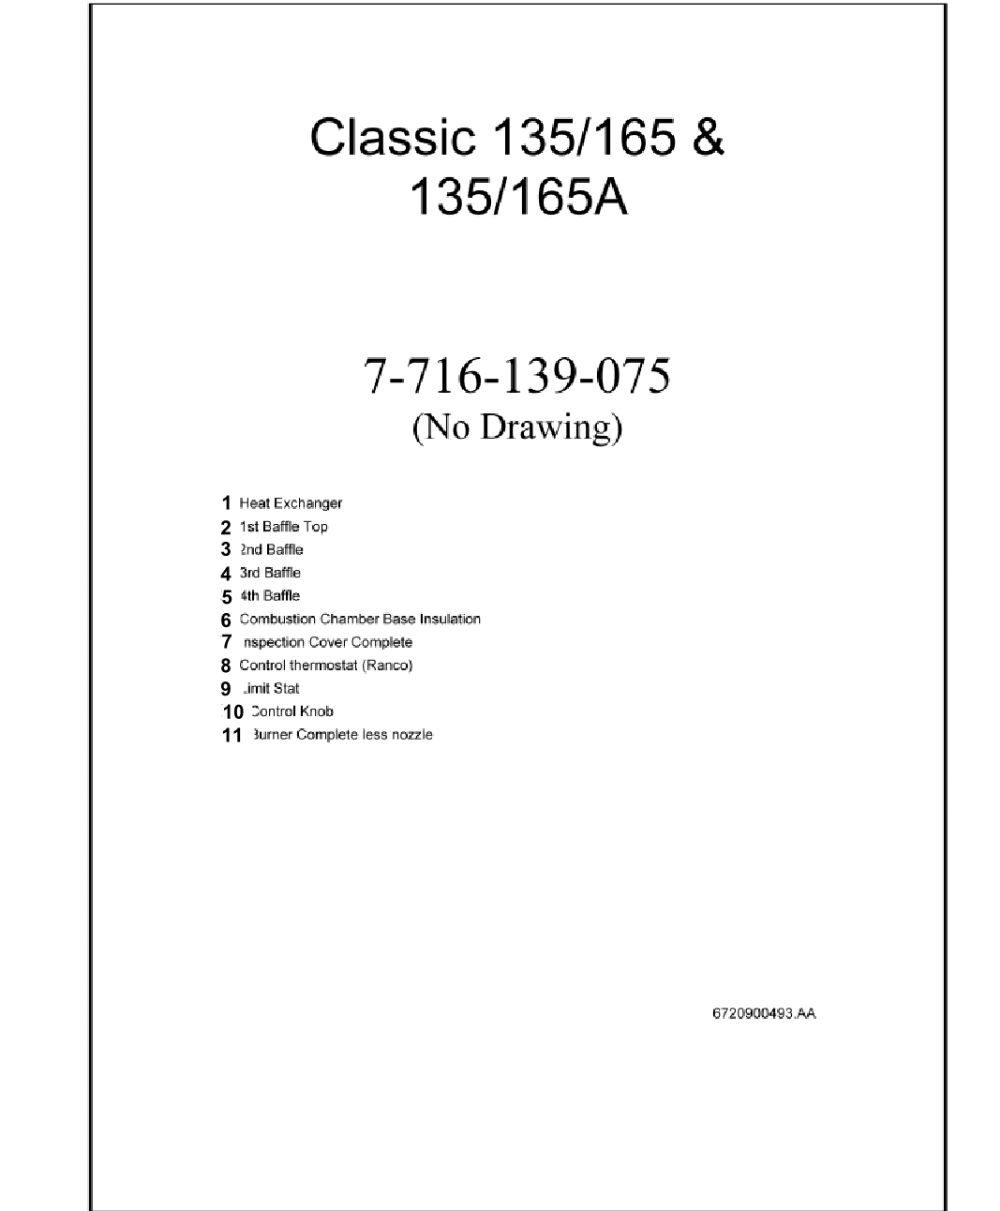 CLASSIC 135/165 & 135/165A - appliance_8538